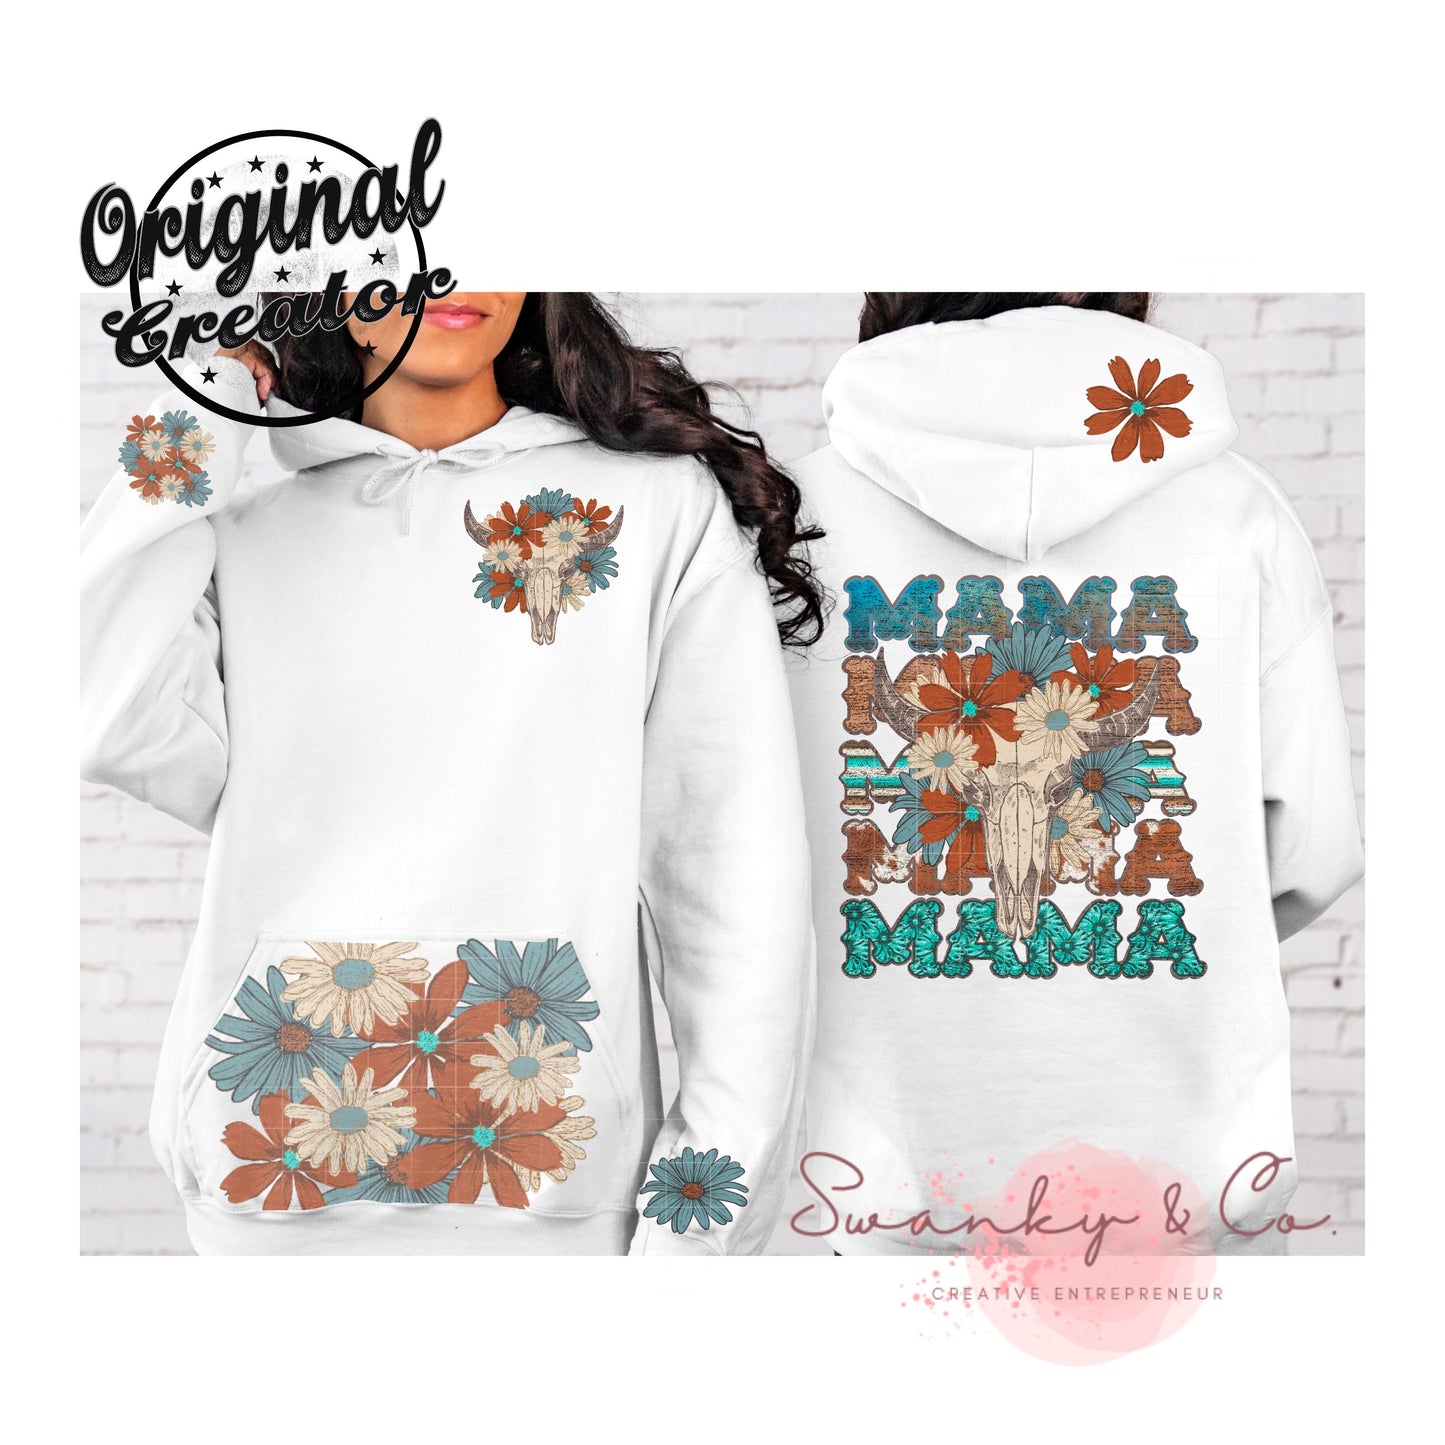 Western MAMA Tshirt Design, Pocket and Back Design with Patches